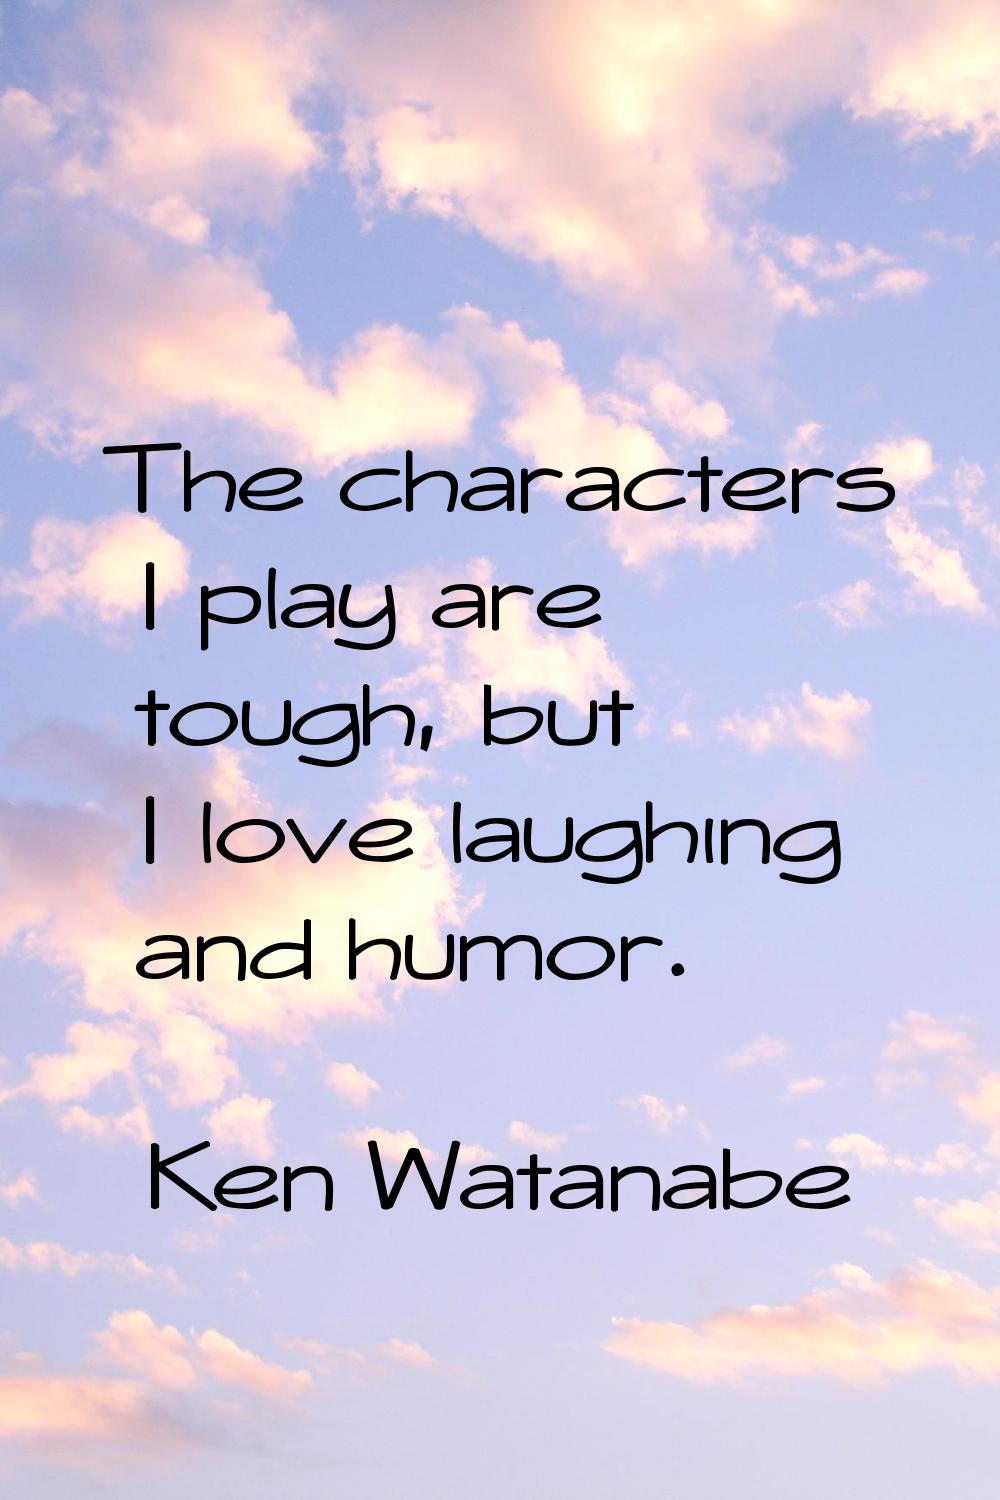 The characters I play are tough, but I love laughing and humor.